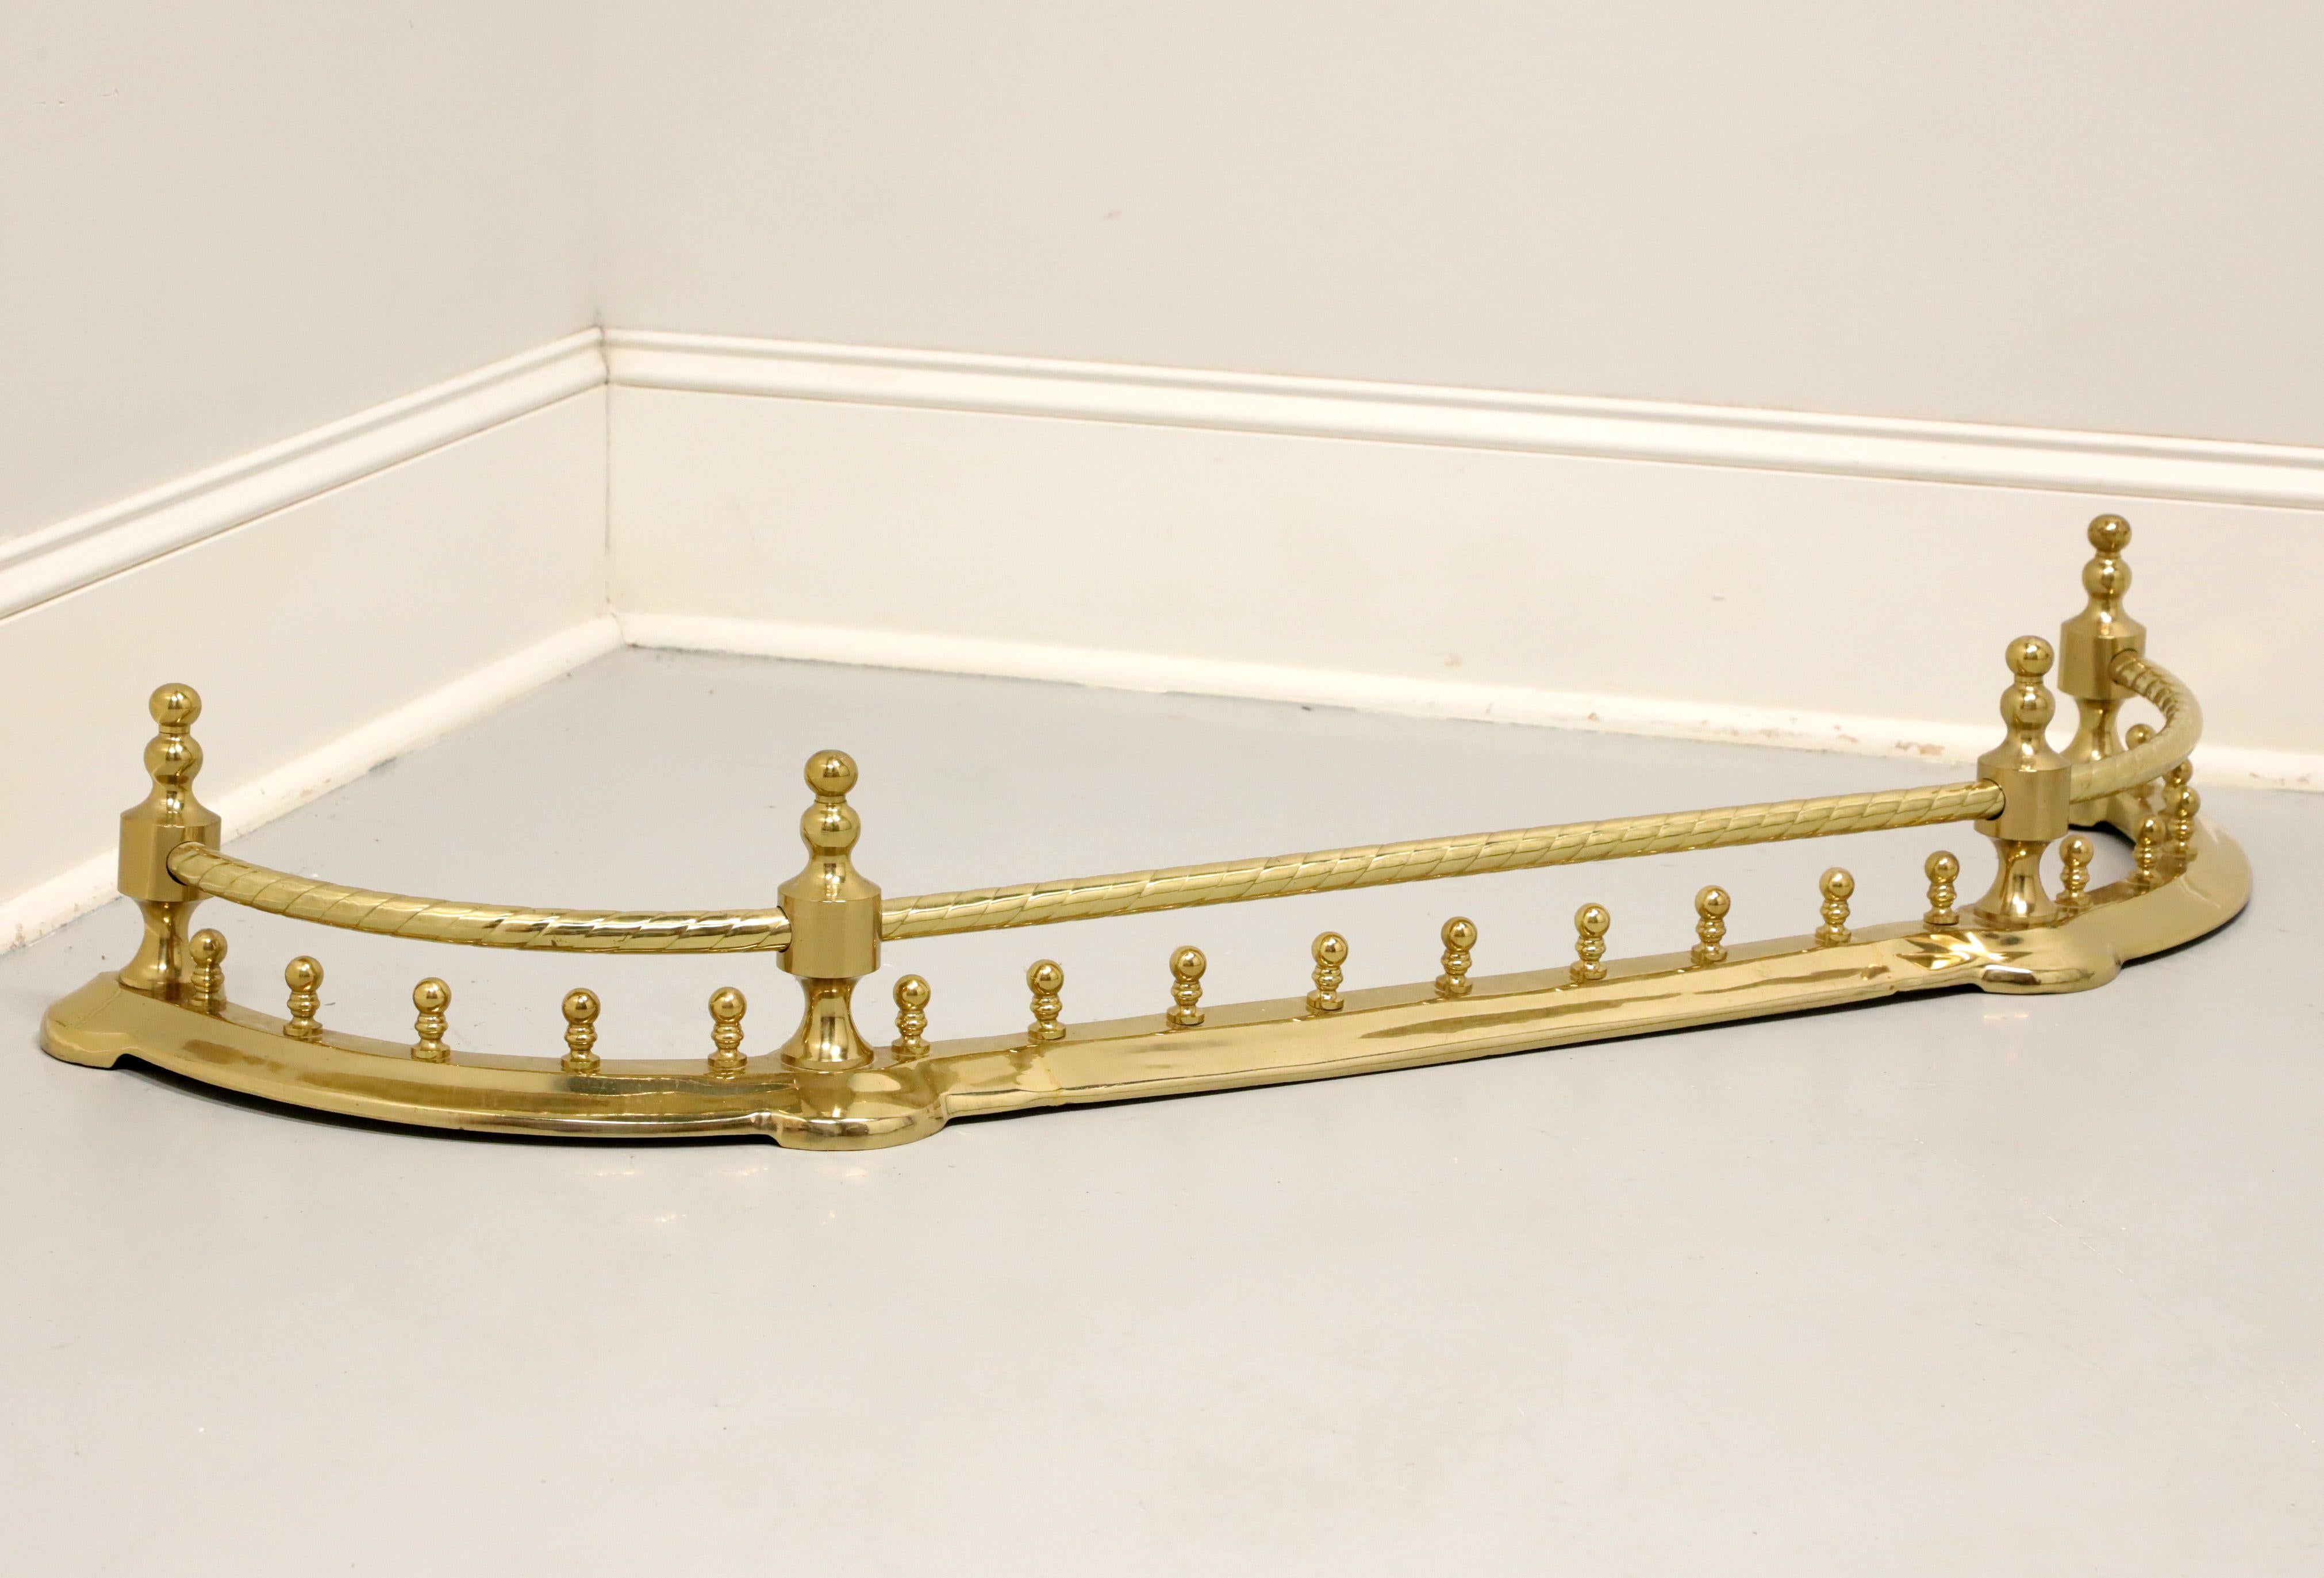 A Traditional style fireplace fender by Decorative Crafts. Solid handcrafted brass with a lacquered finish. Features an arched shape, swirl effect to top rail, four finial capped posts, and multiple decorative rounded posts to wider lower rail. No